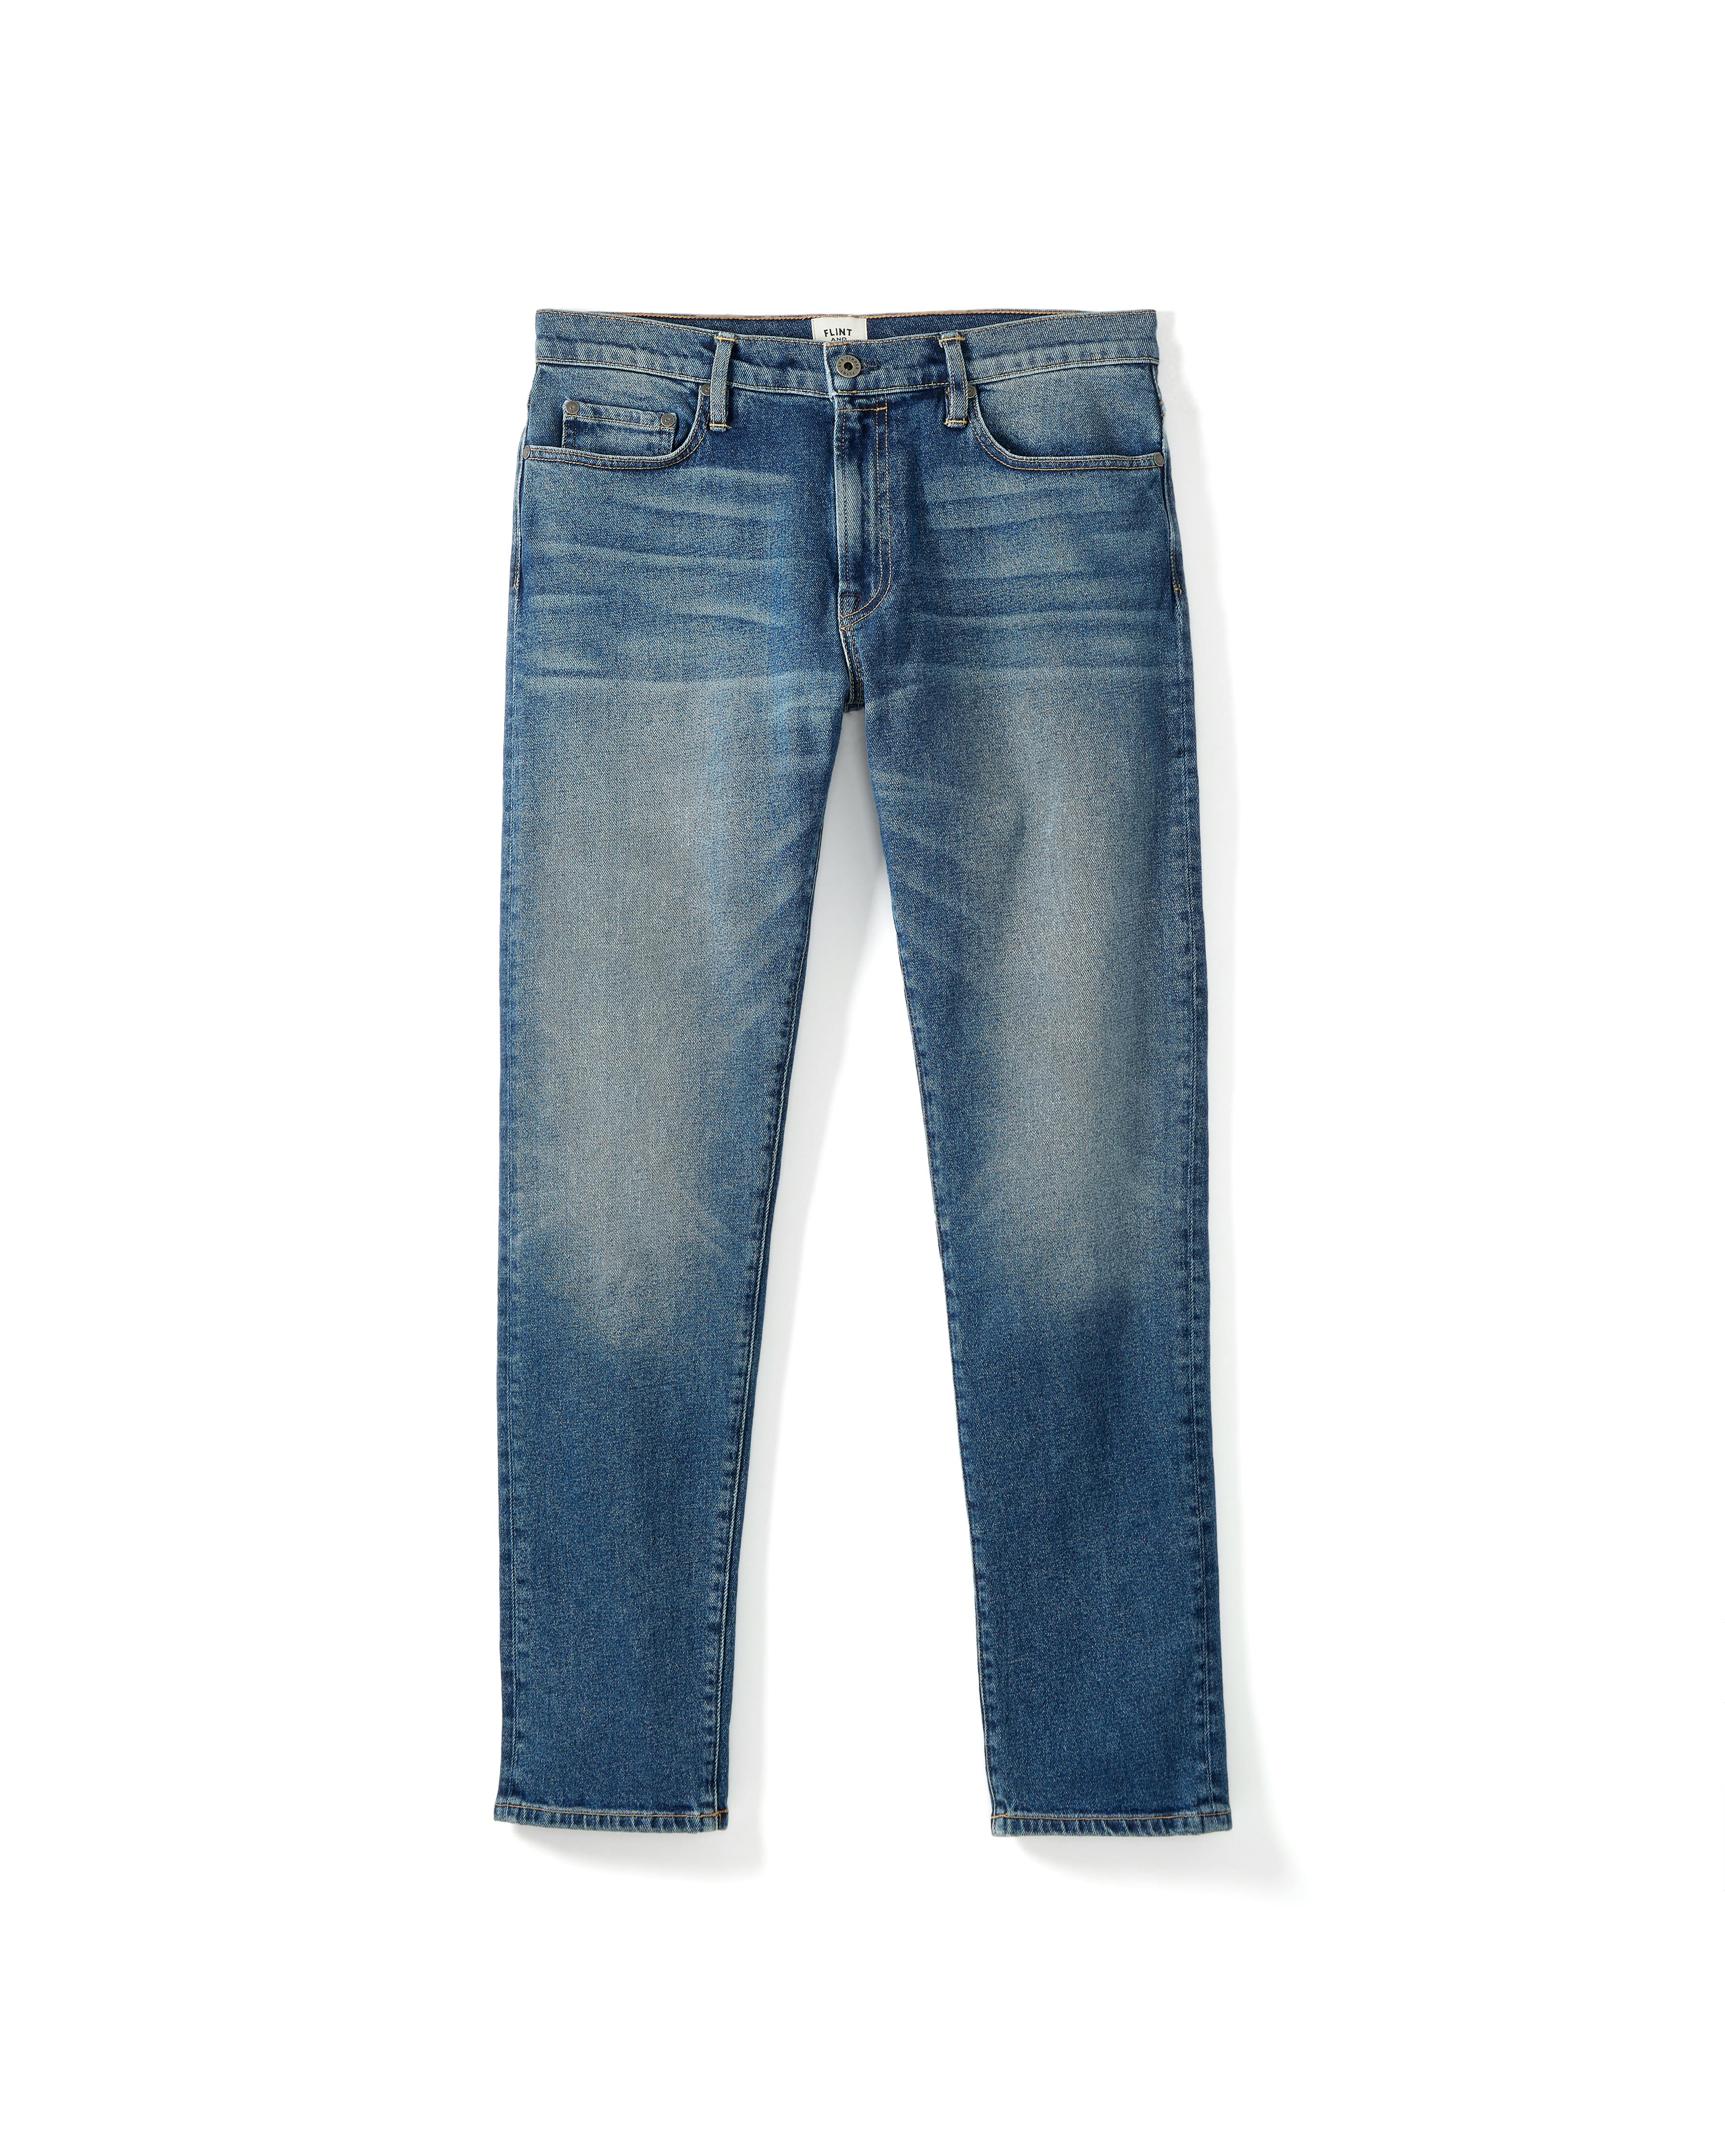 | Flint Tinder Huckberry (1-Year Medium - Athletic | Wash) All-American and - Denim Stretch Jeans Tapered